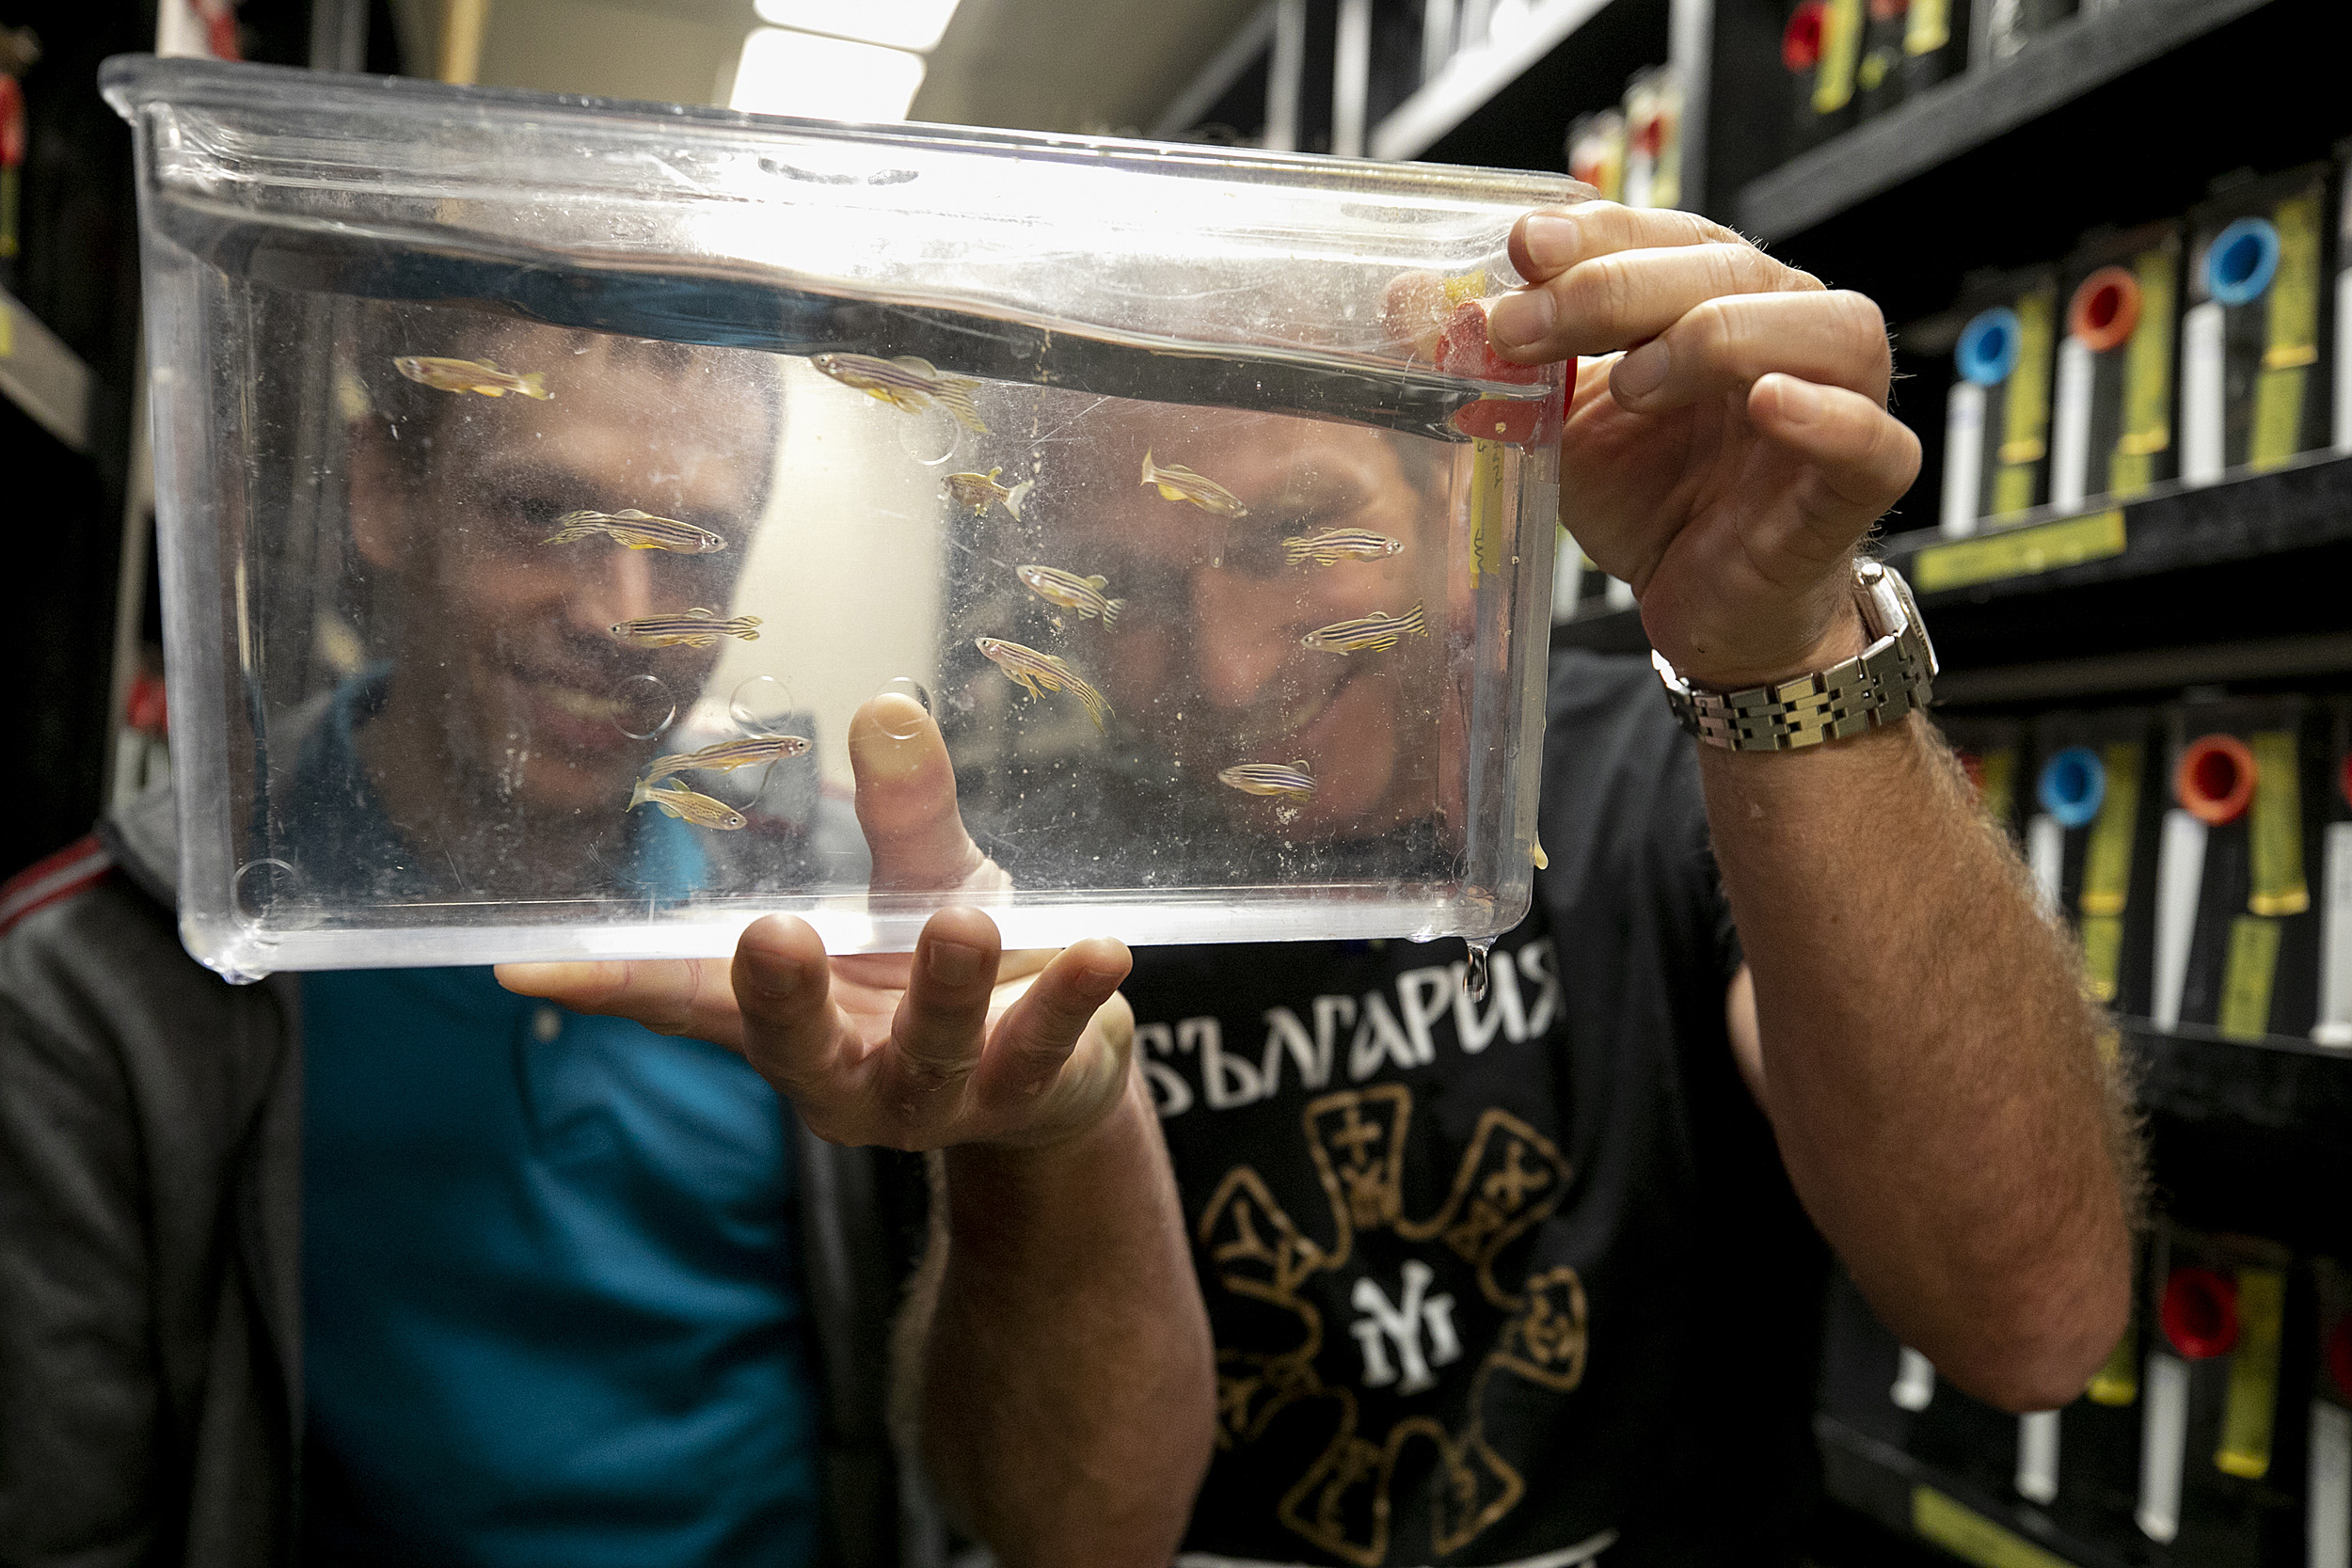 Researchers looking at zebrafish